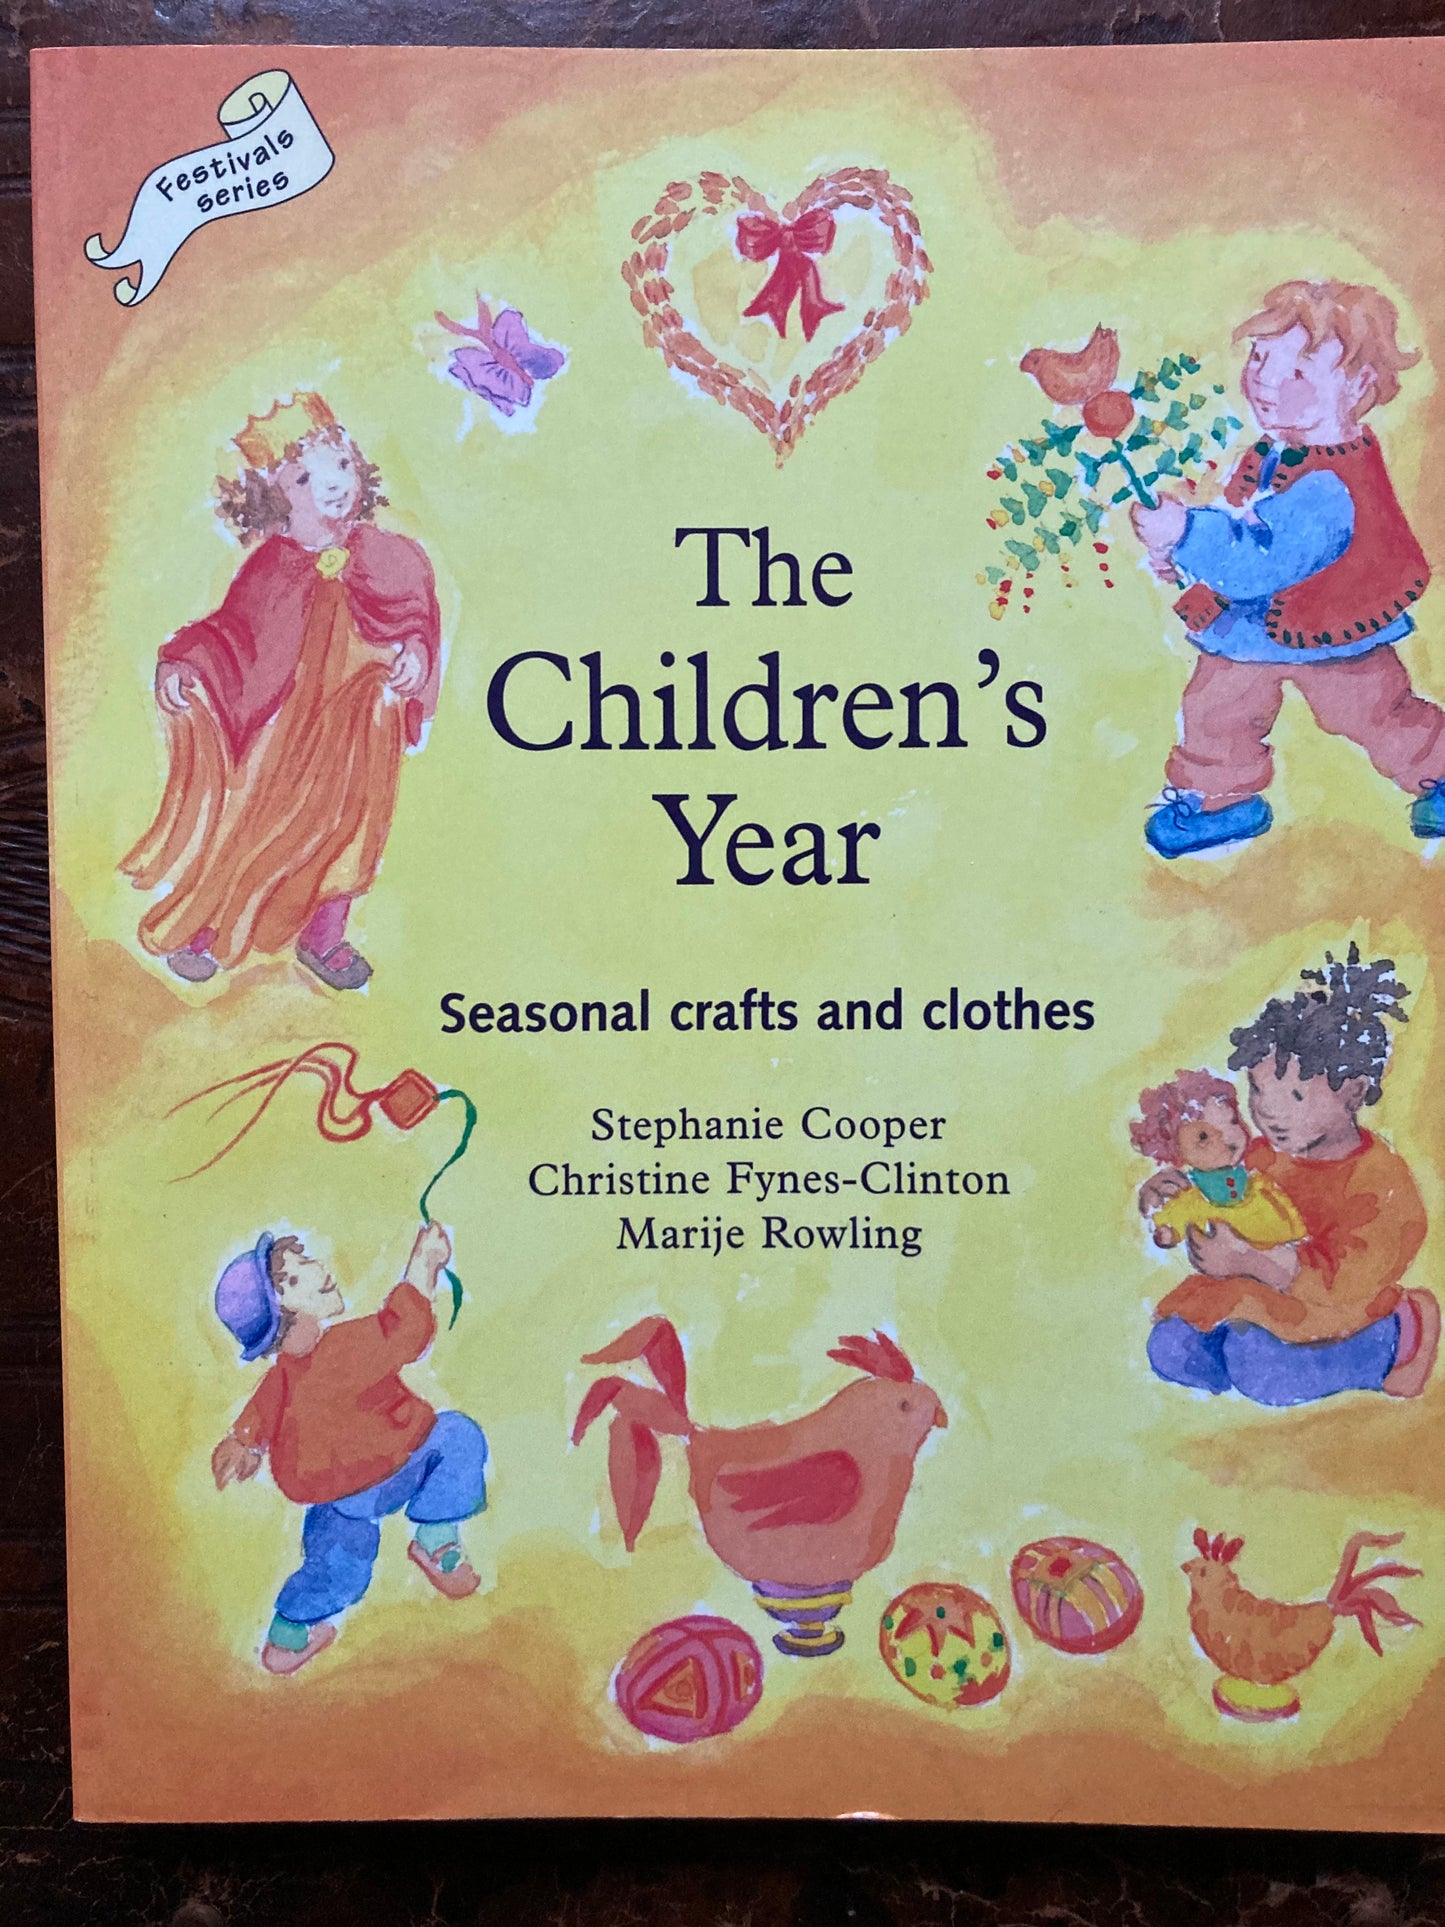 Parenting Resource Book - THE CHILDREN'S YEAR